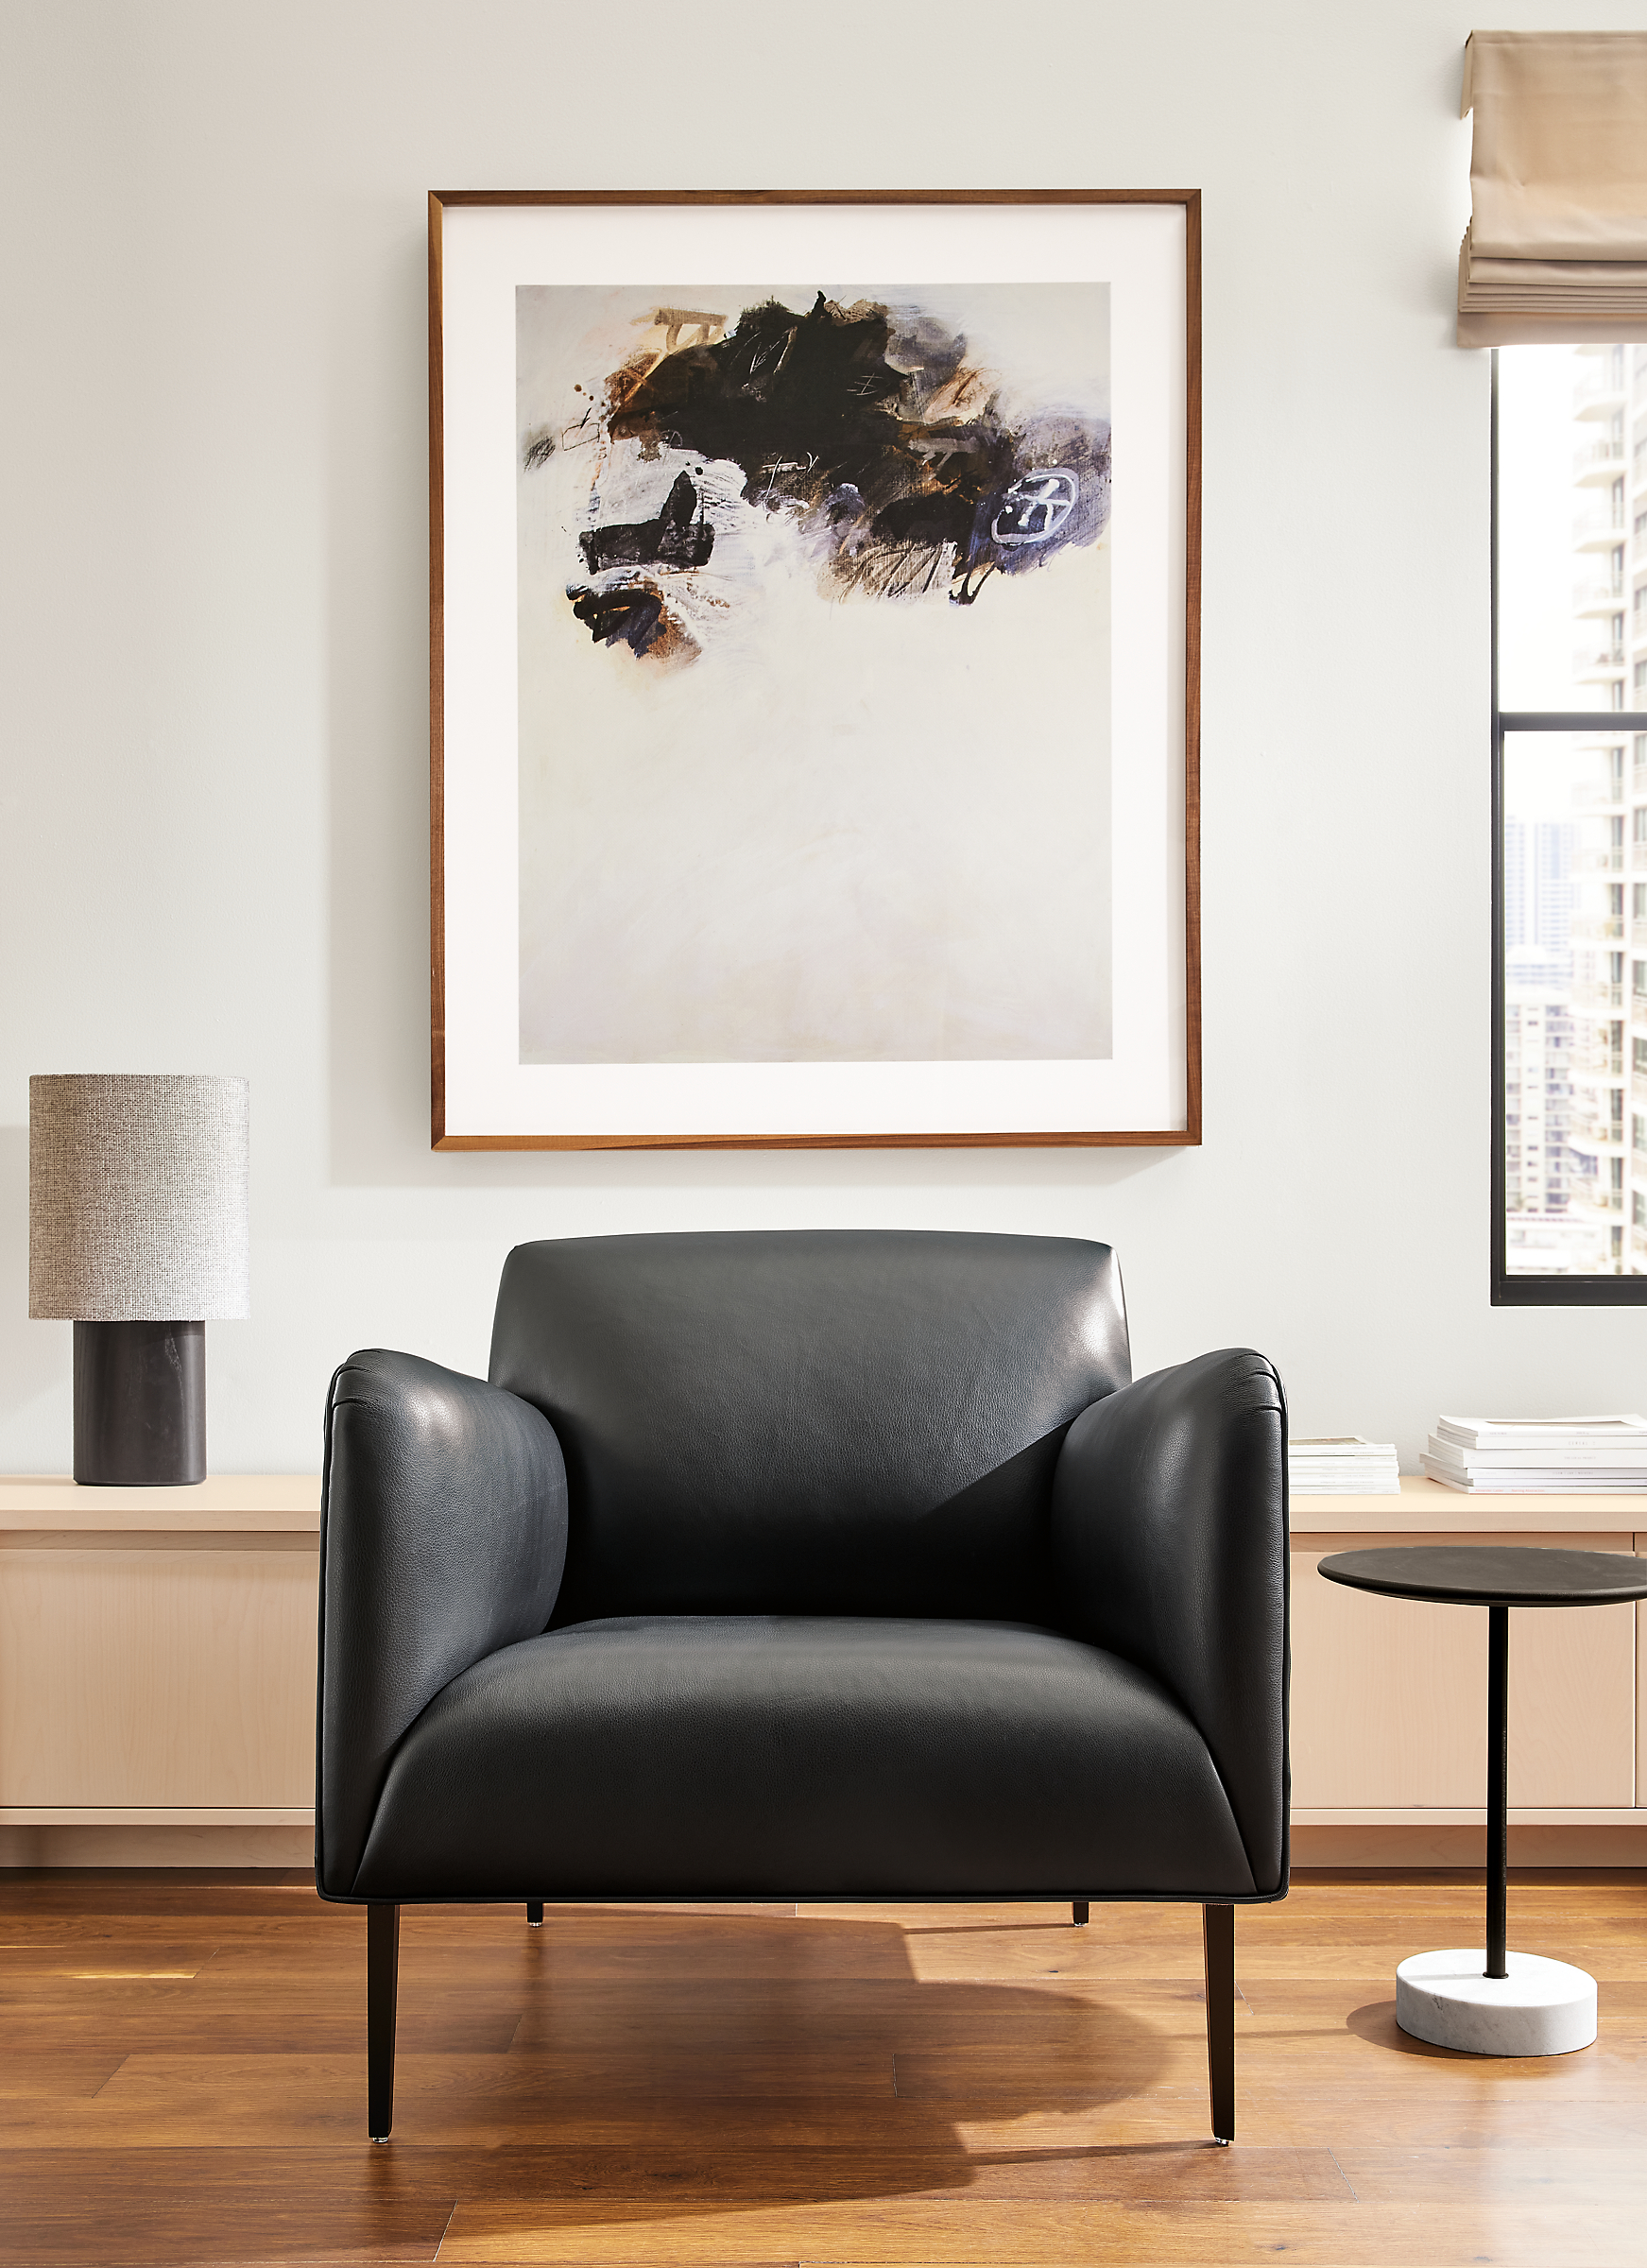 living room with matteo chair in urbino leather and gabriel belgeonne wall art.